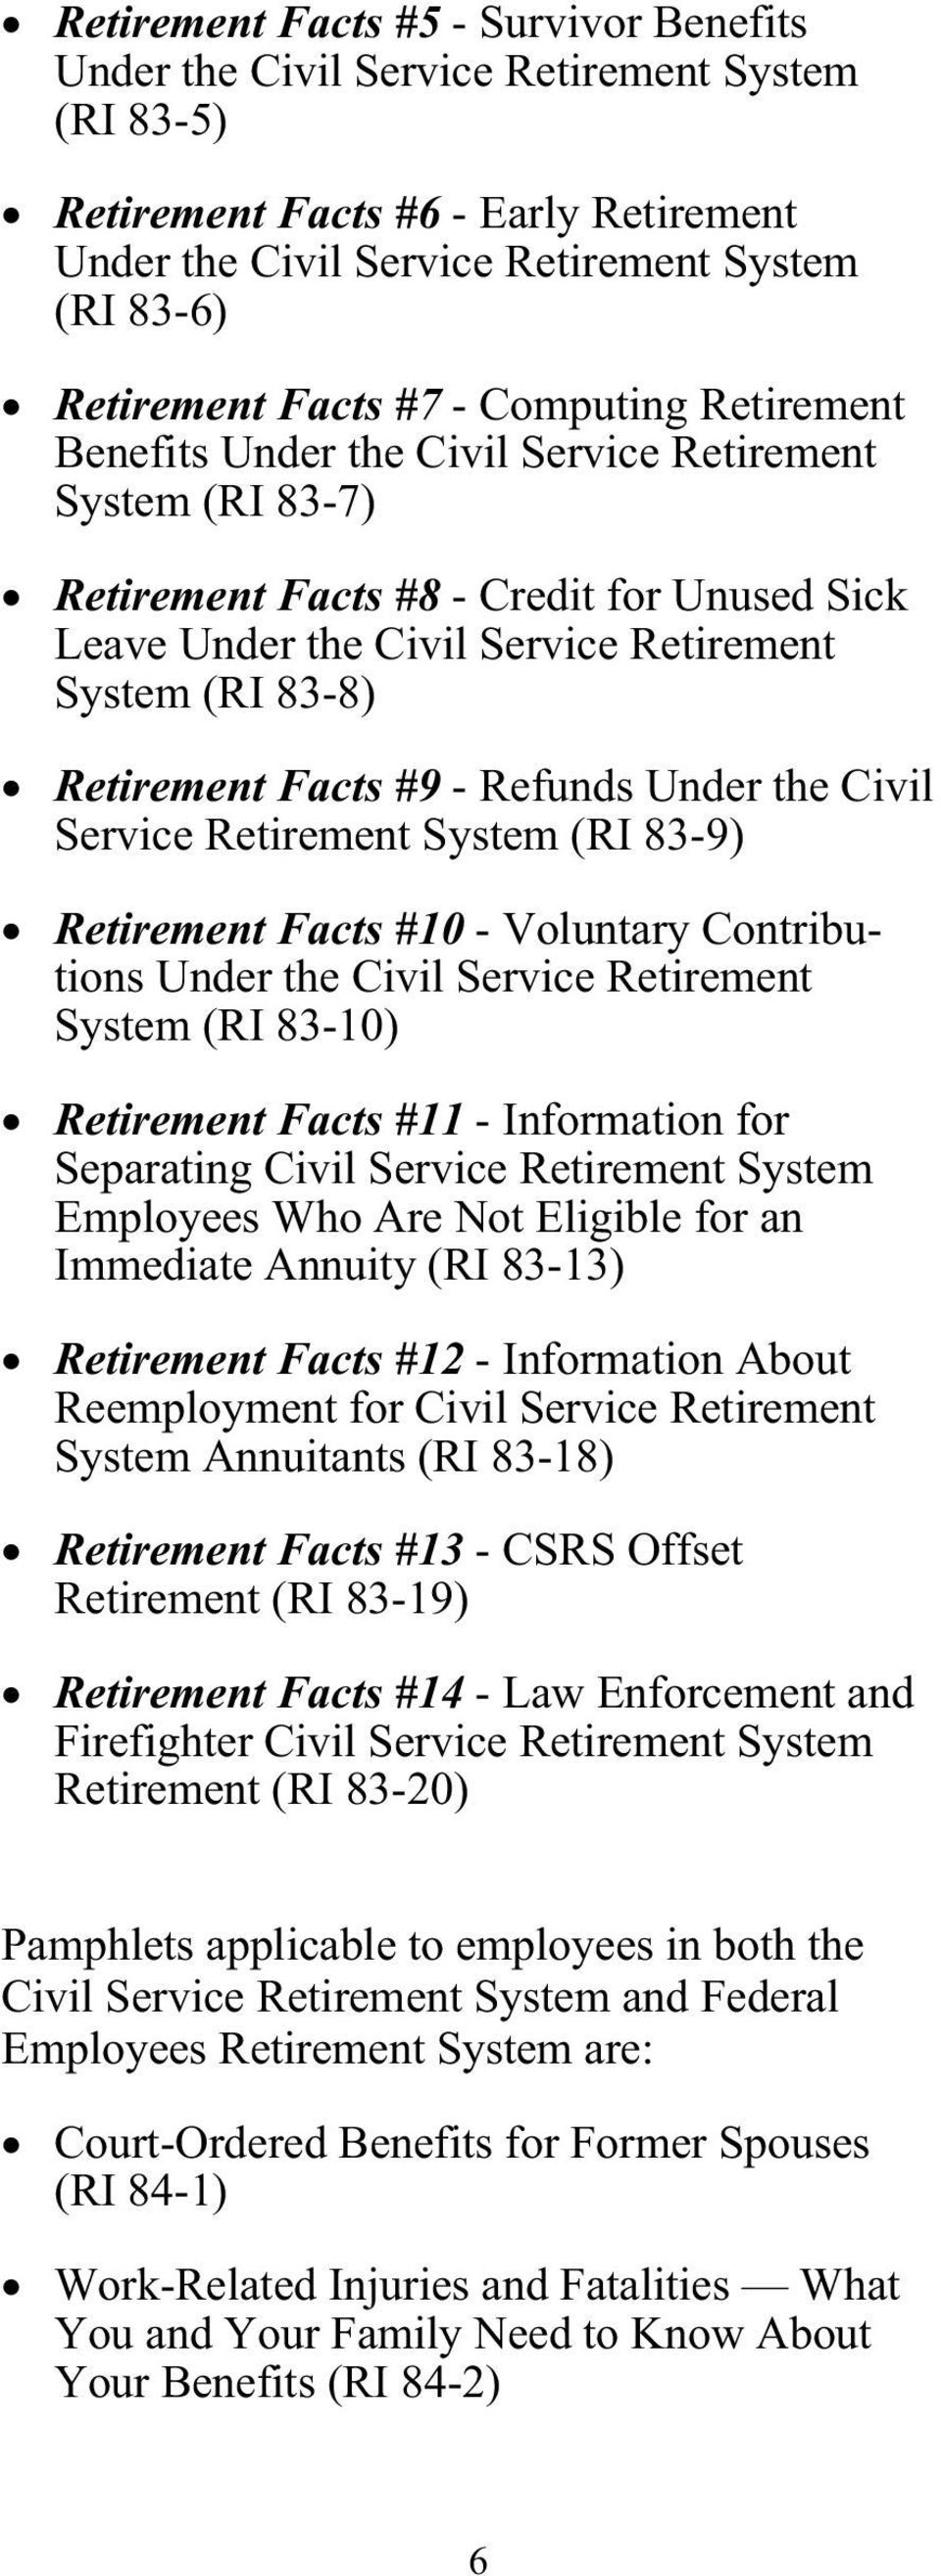 Retirement Facts #9 - Refunds Under the Civil Service Retirement System (RI 83-9) Retirement Facts #10 - Voluntary Contributions Under the Civil Service Retirement System (RI 83-10) Retirement Facts